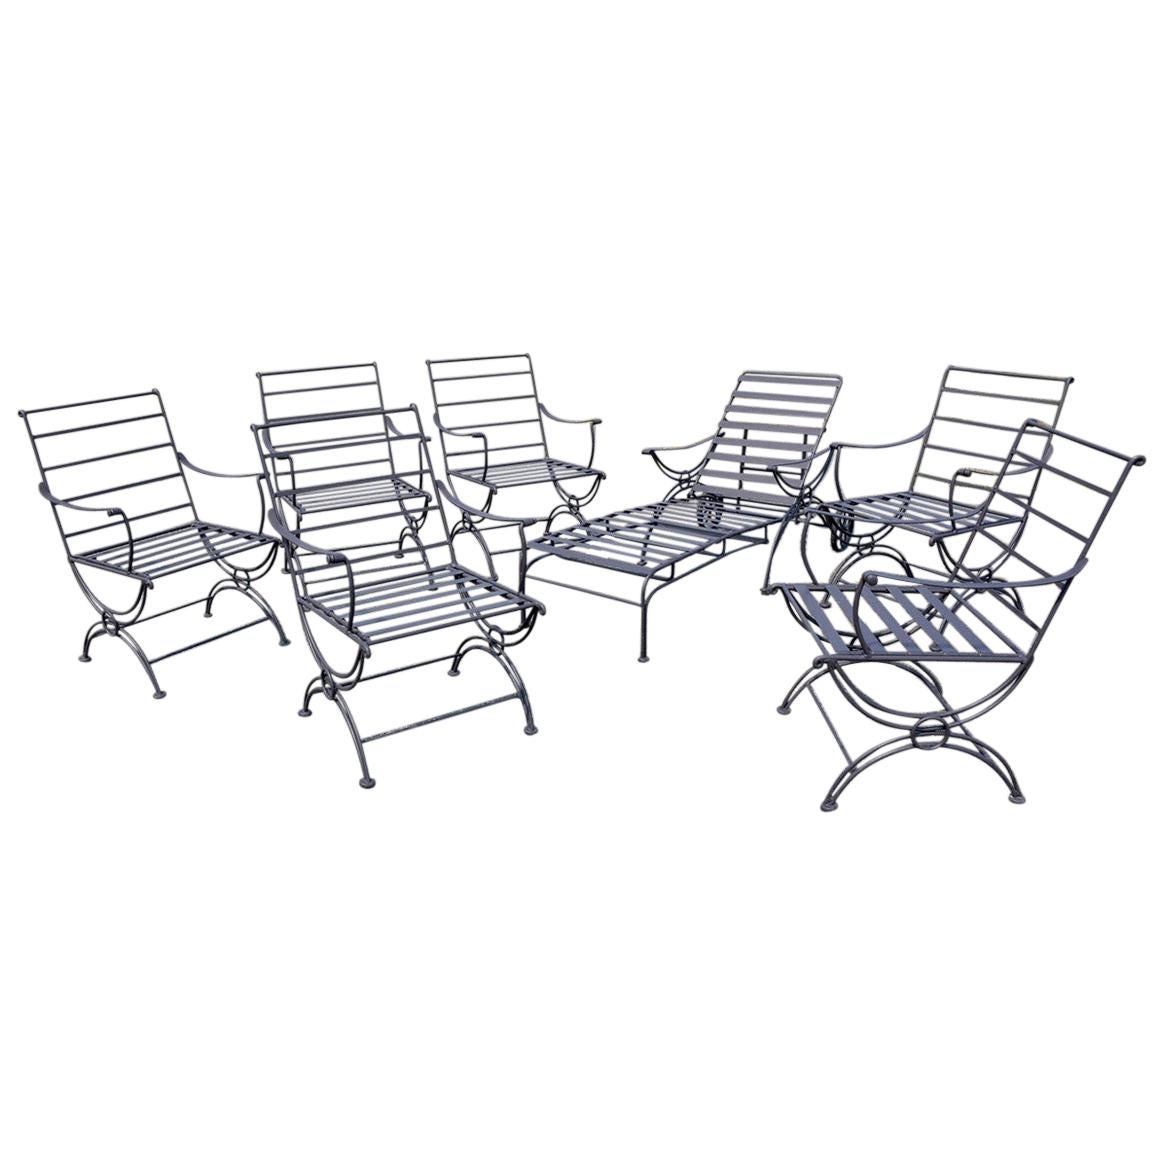 Group of 7-- 6 Metal Garden Dining Chairs and 1 Chaise Lounge